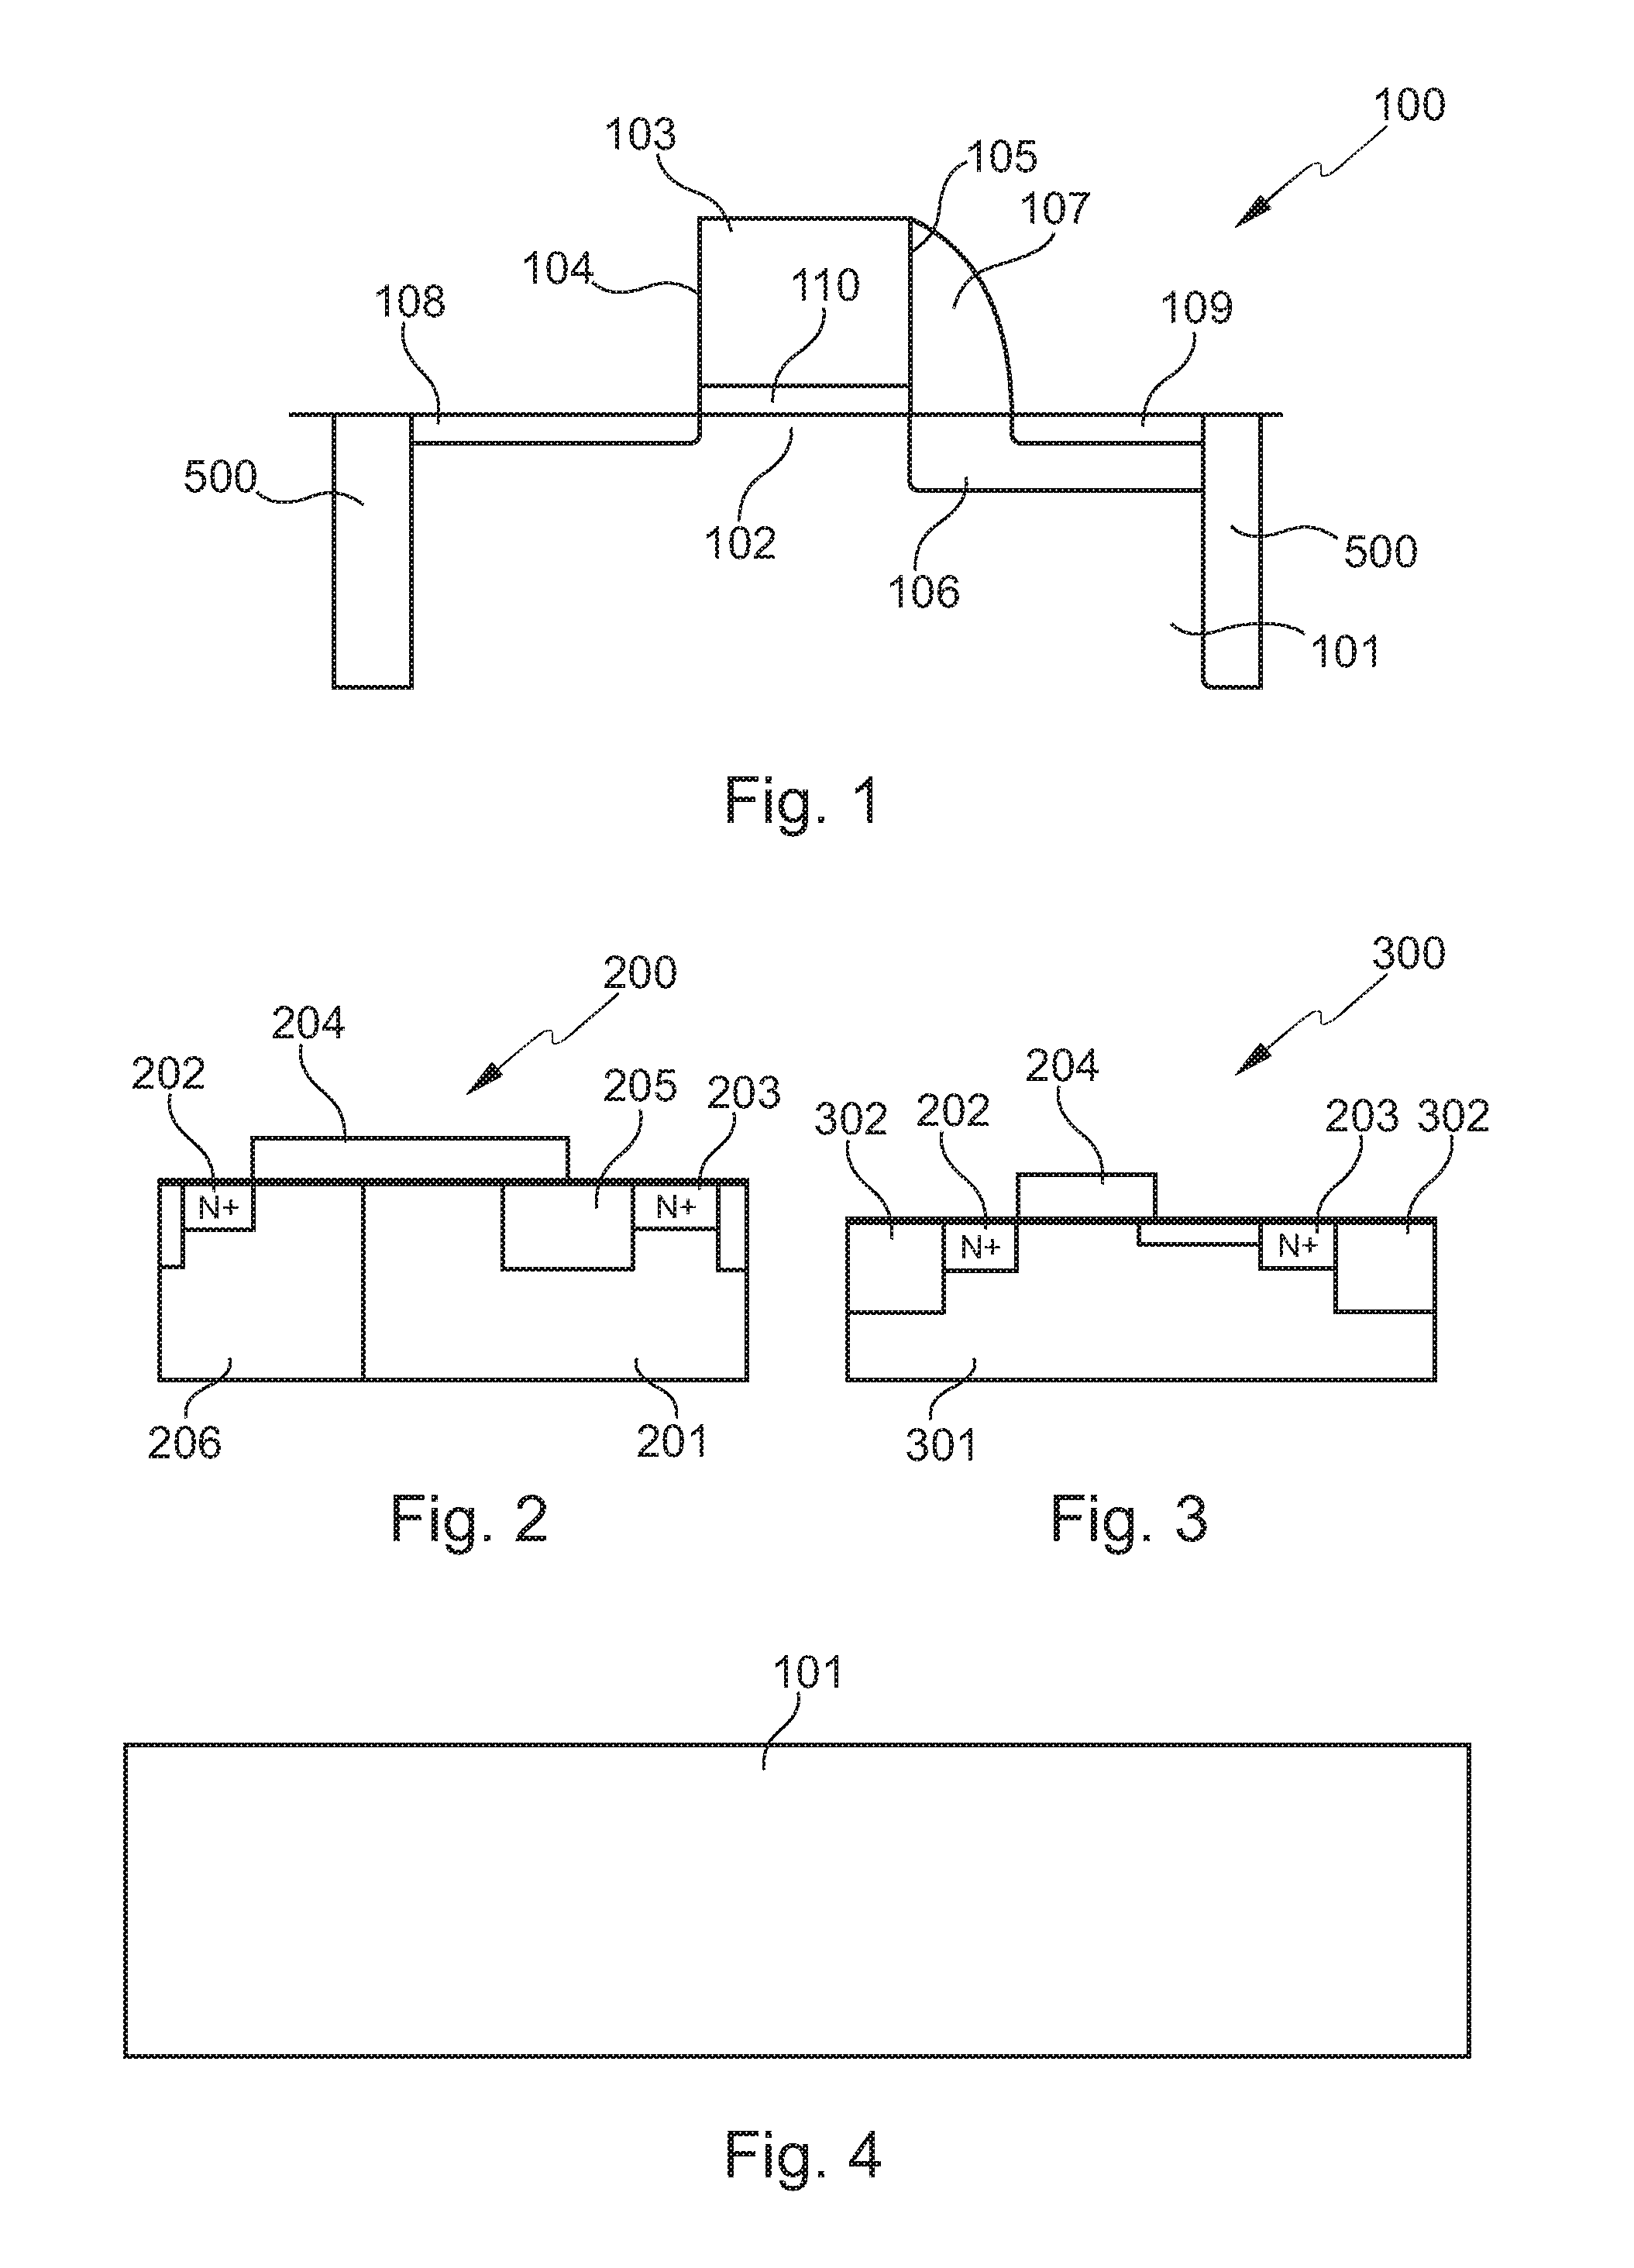 Extended drain transistor and method of manufacturing the same